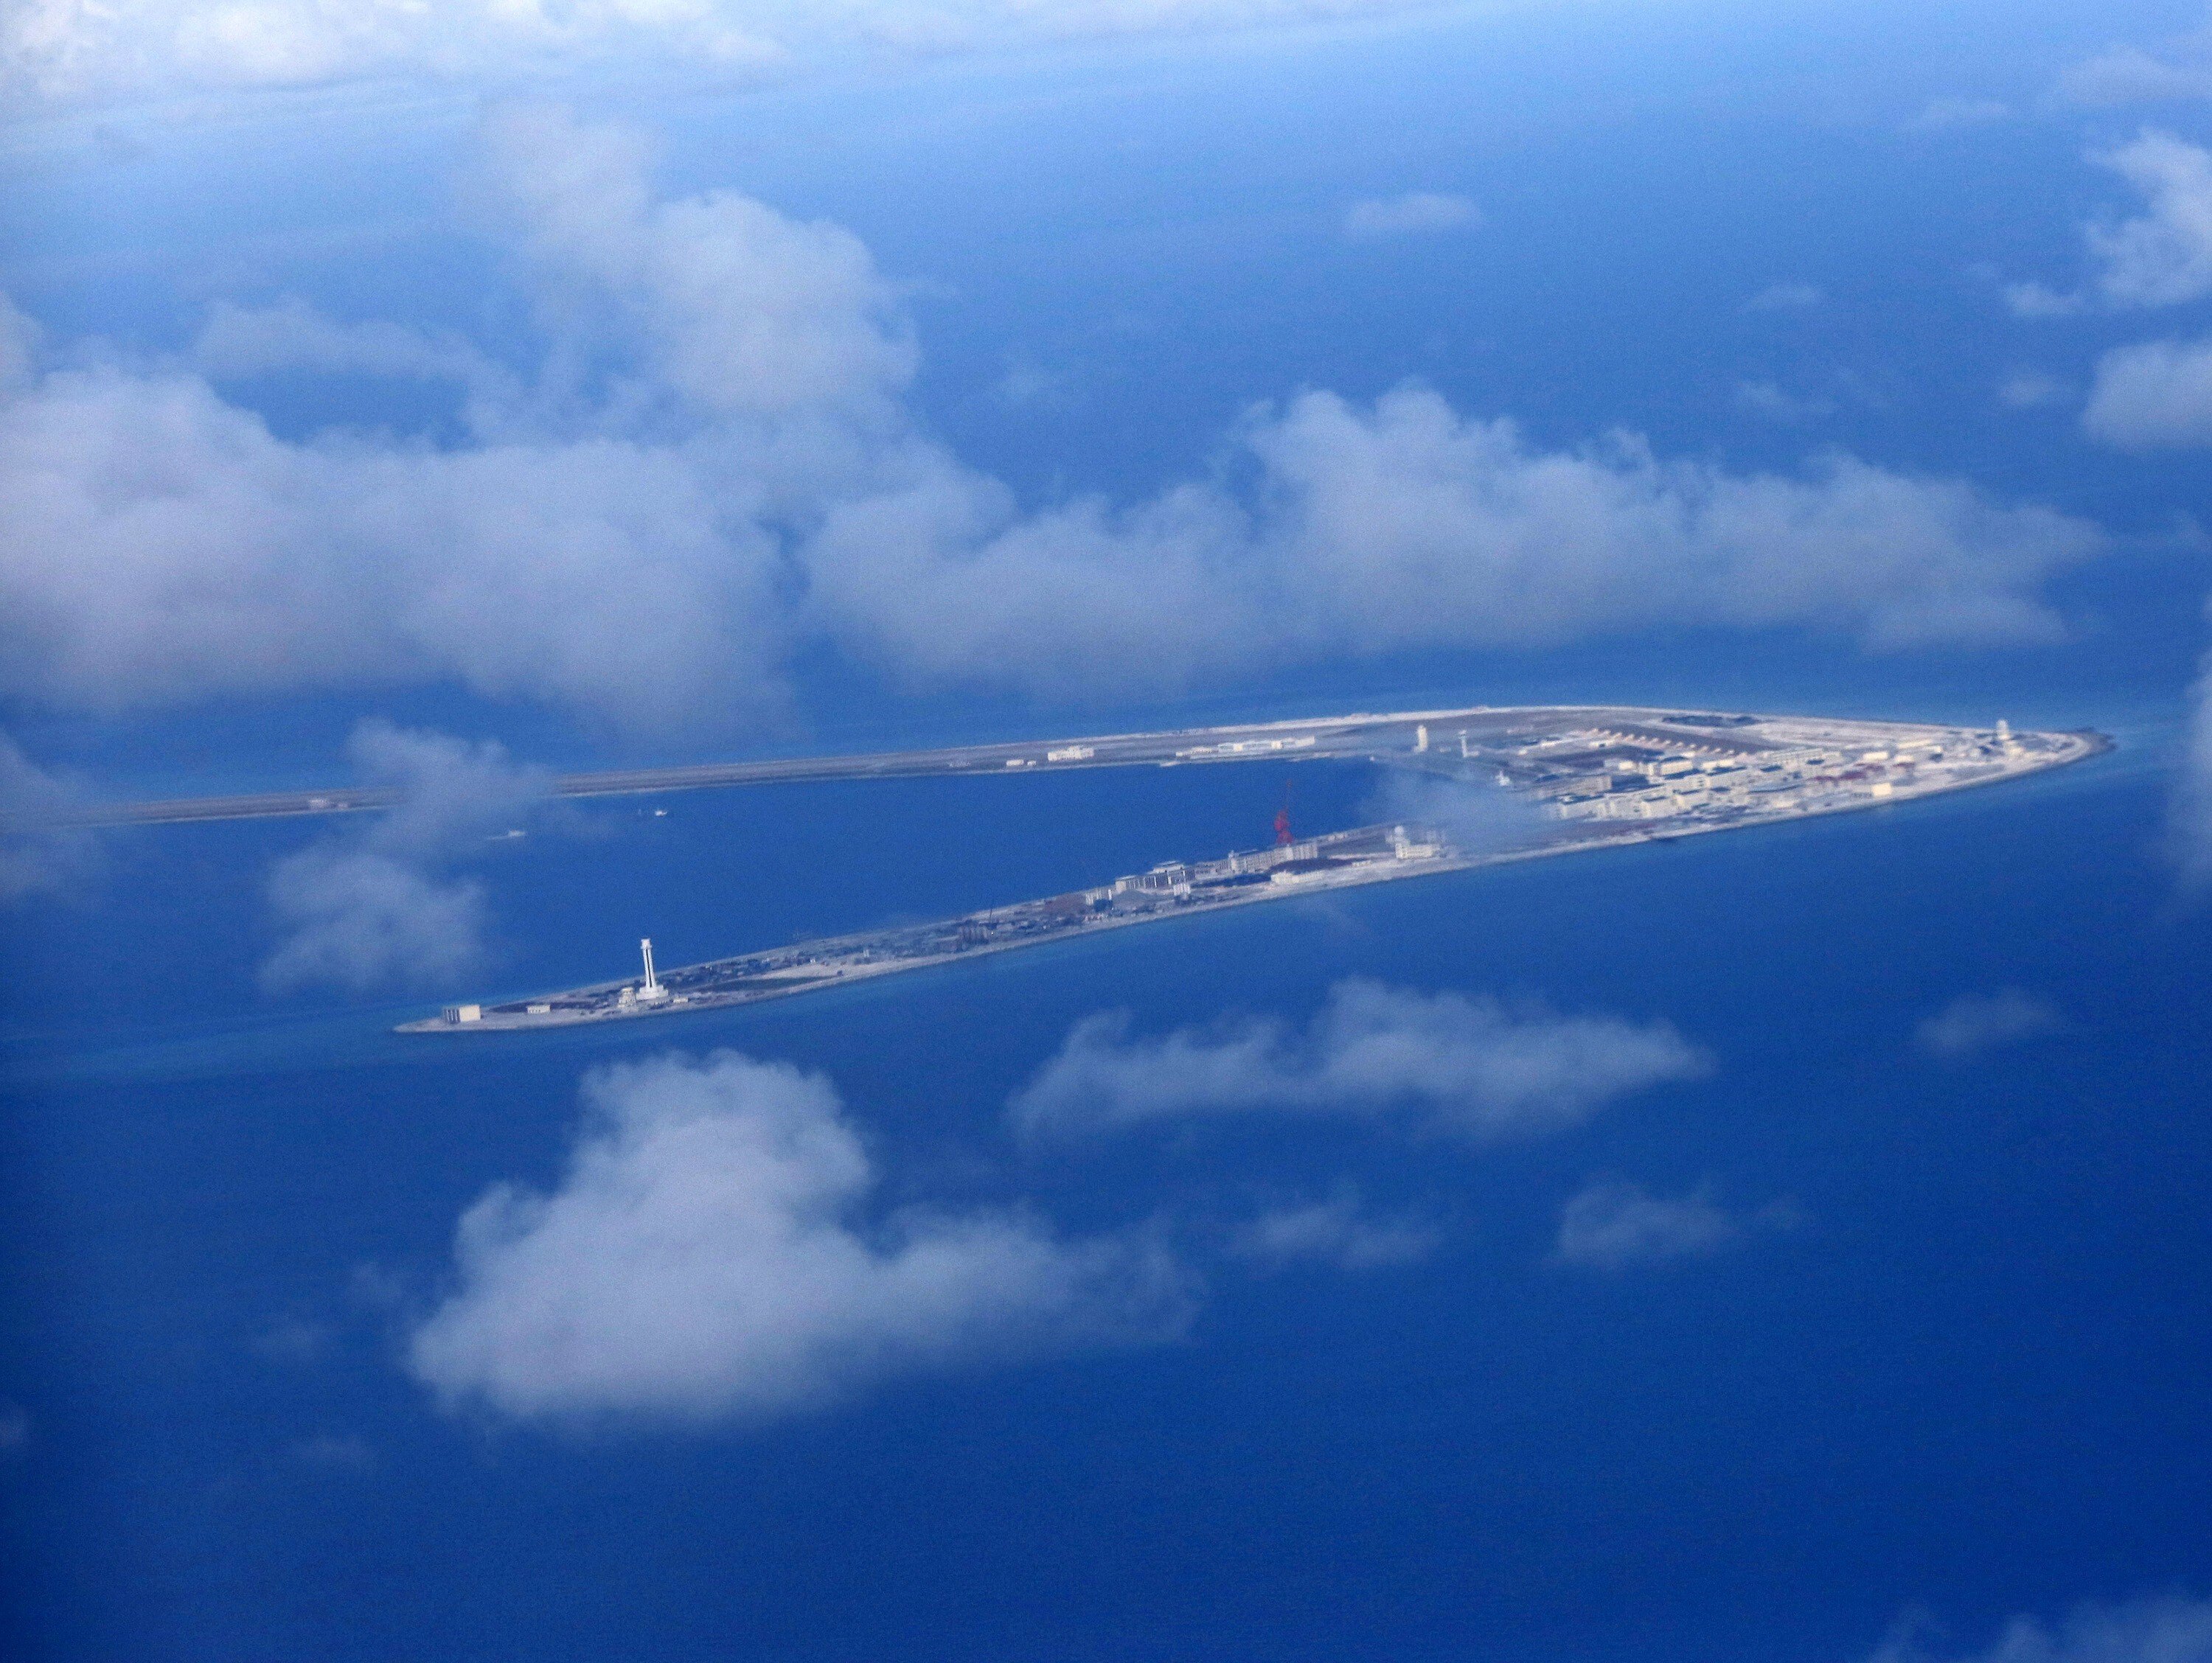 Subi reef, one of several islands claimed by China in the South China Sea. Photo: EPA